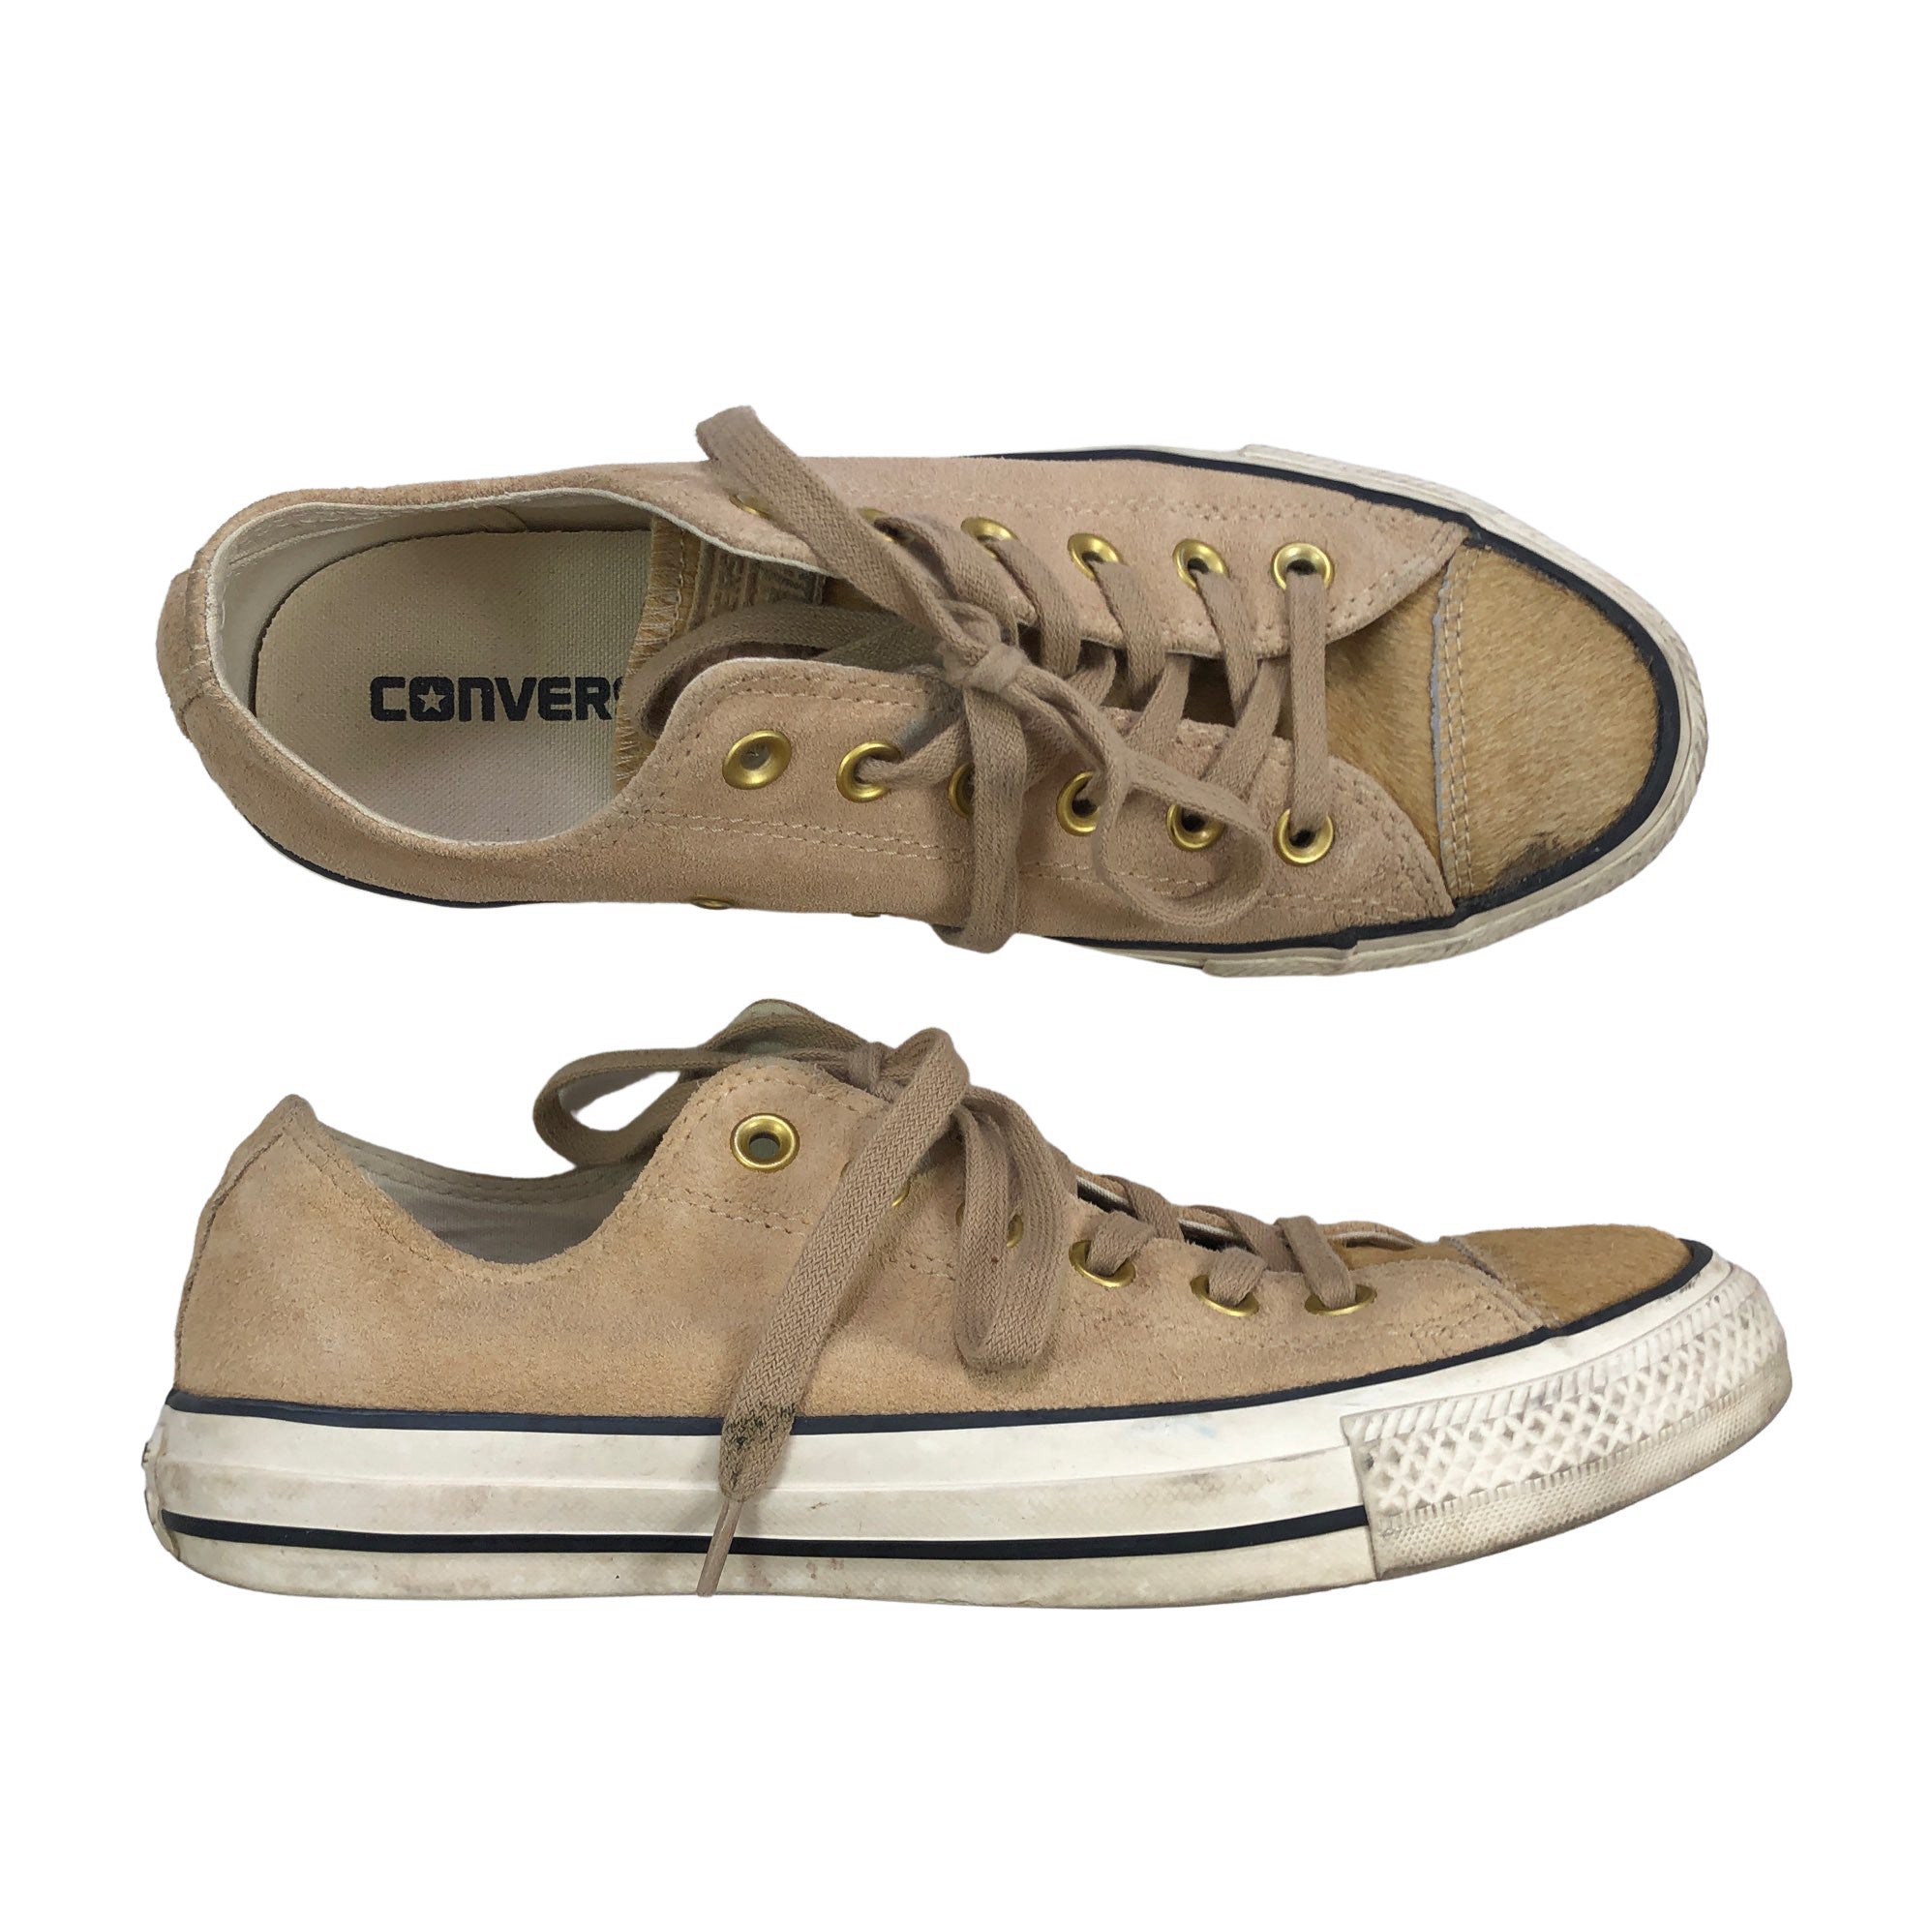 Converse Casual sneakers, size 39 (Brown) | Emmy